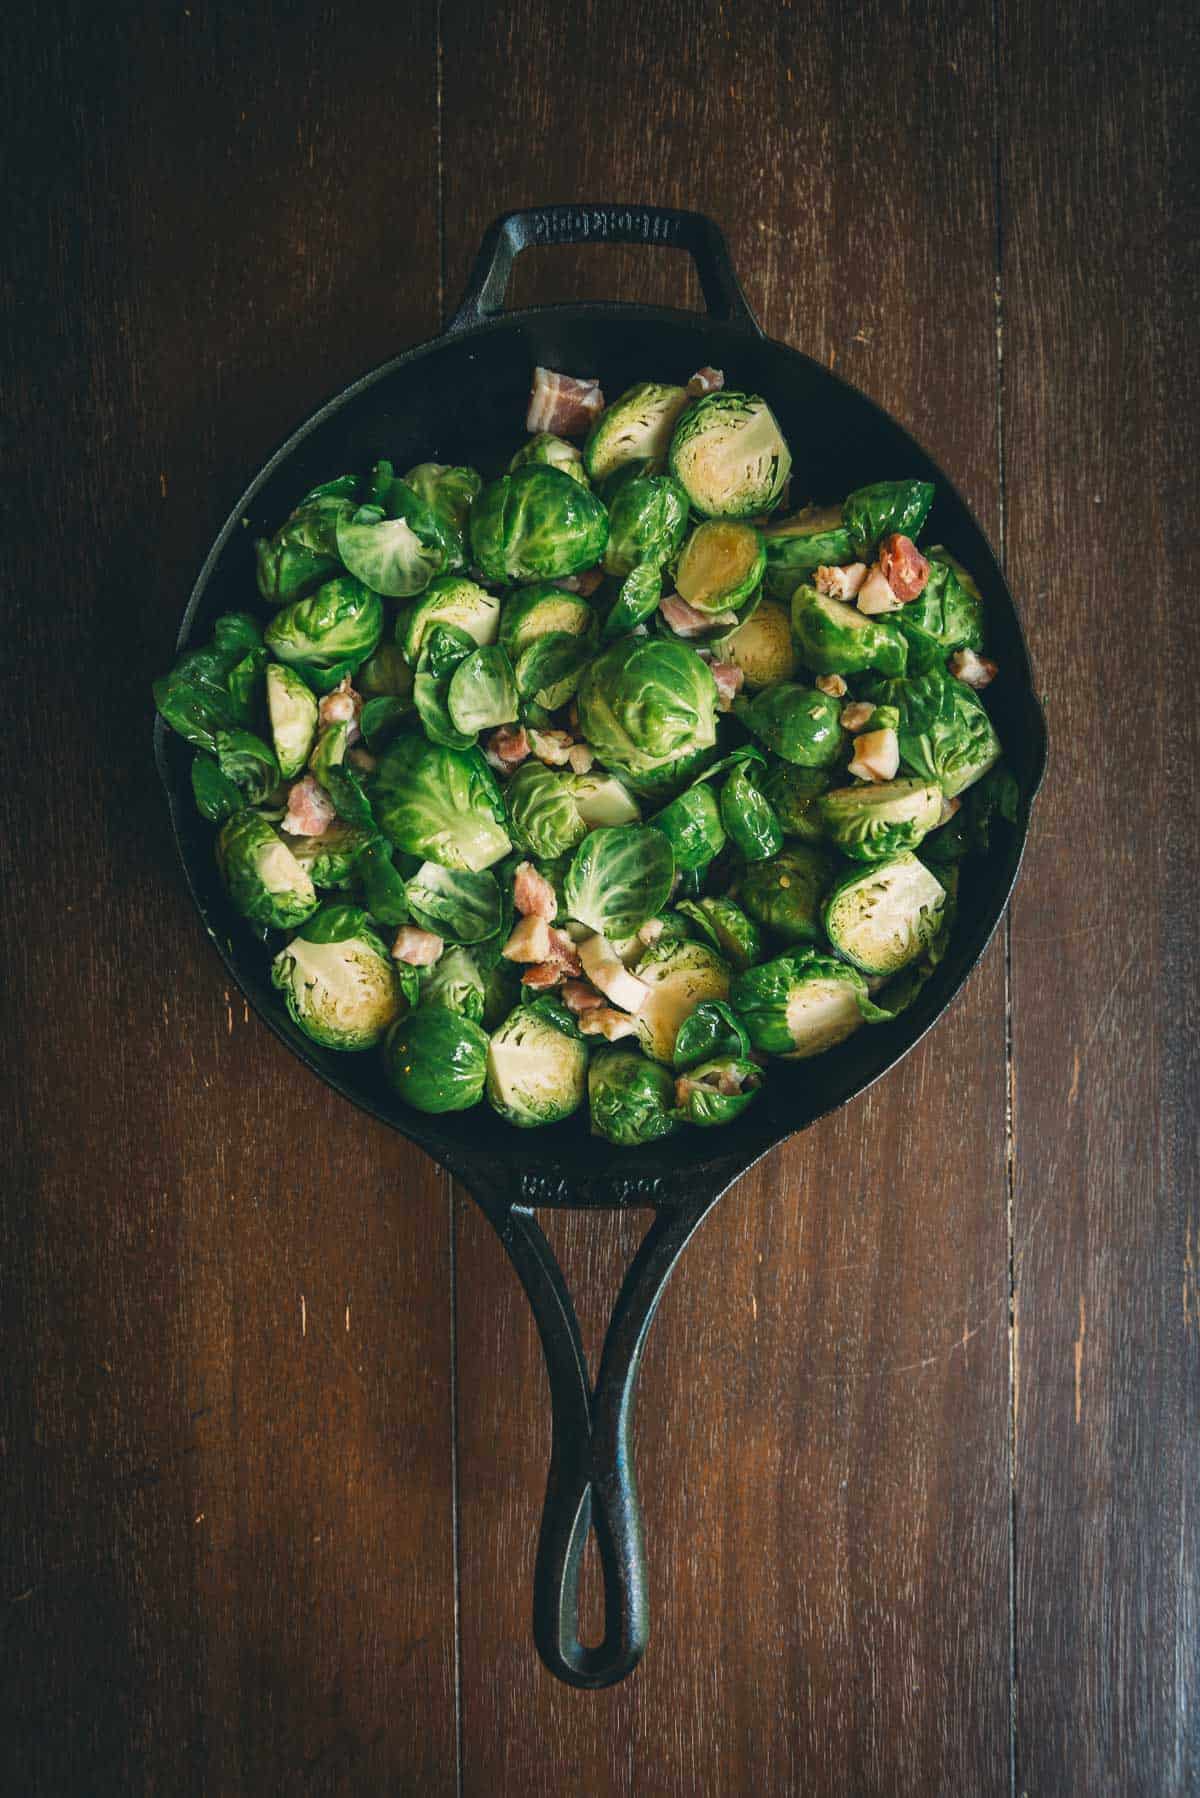 Brussels sprouts in a skillet on a wooden table.